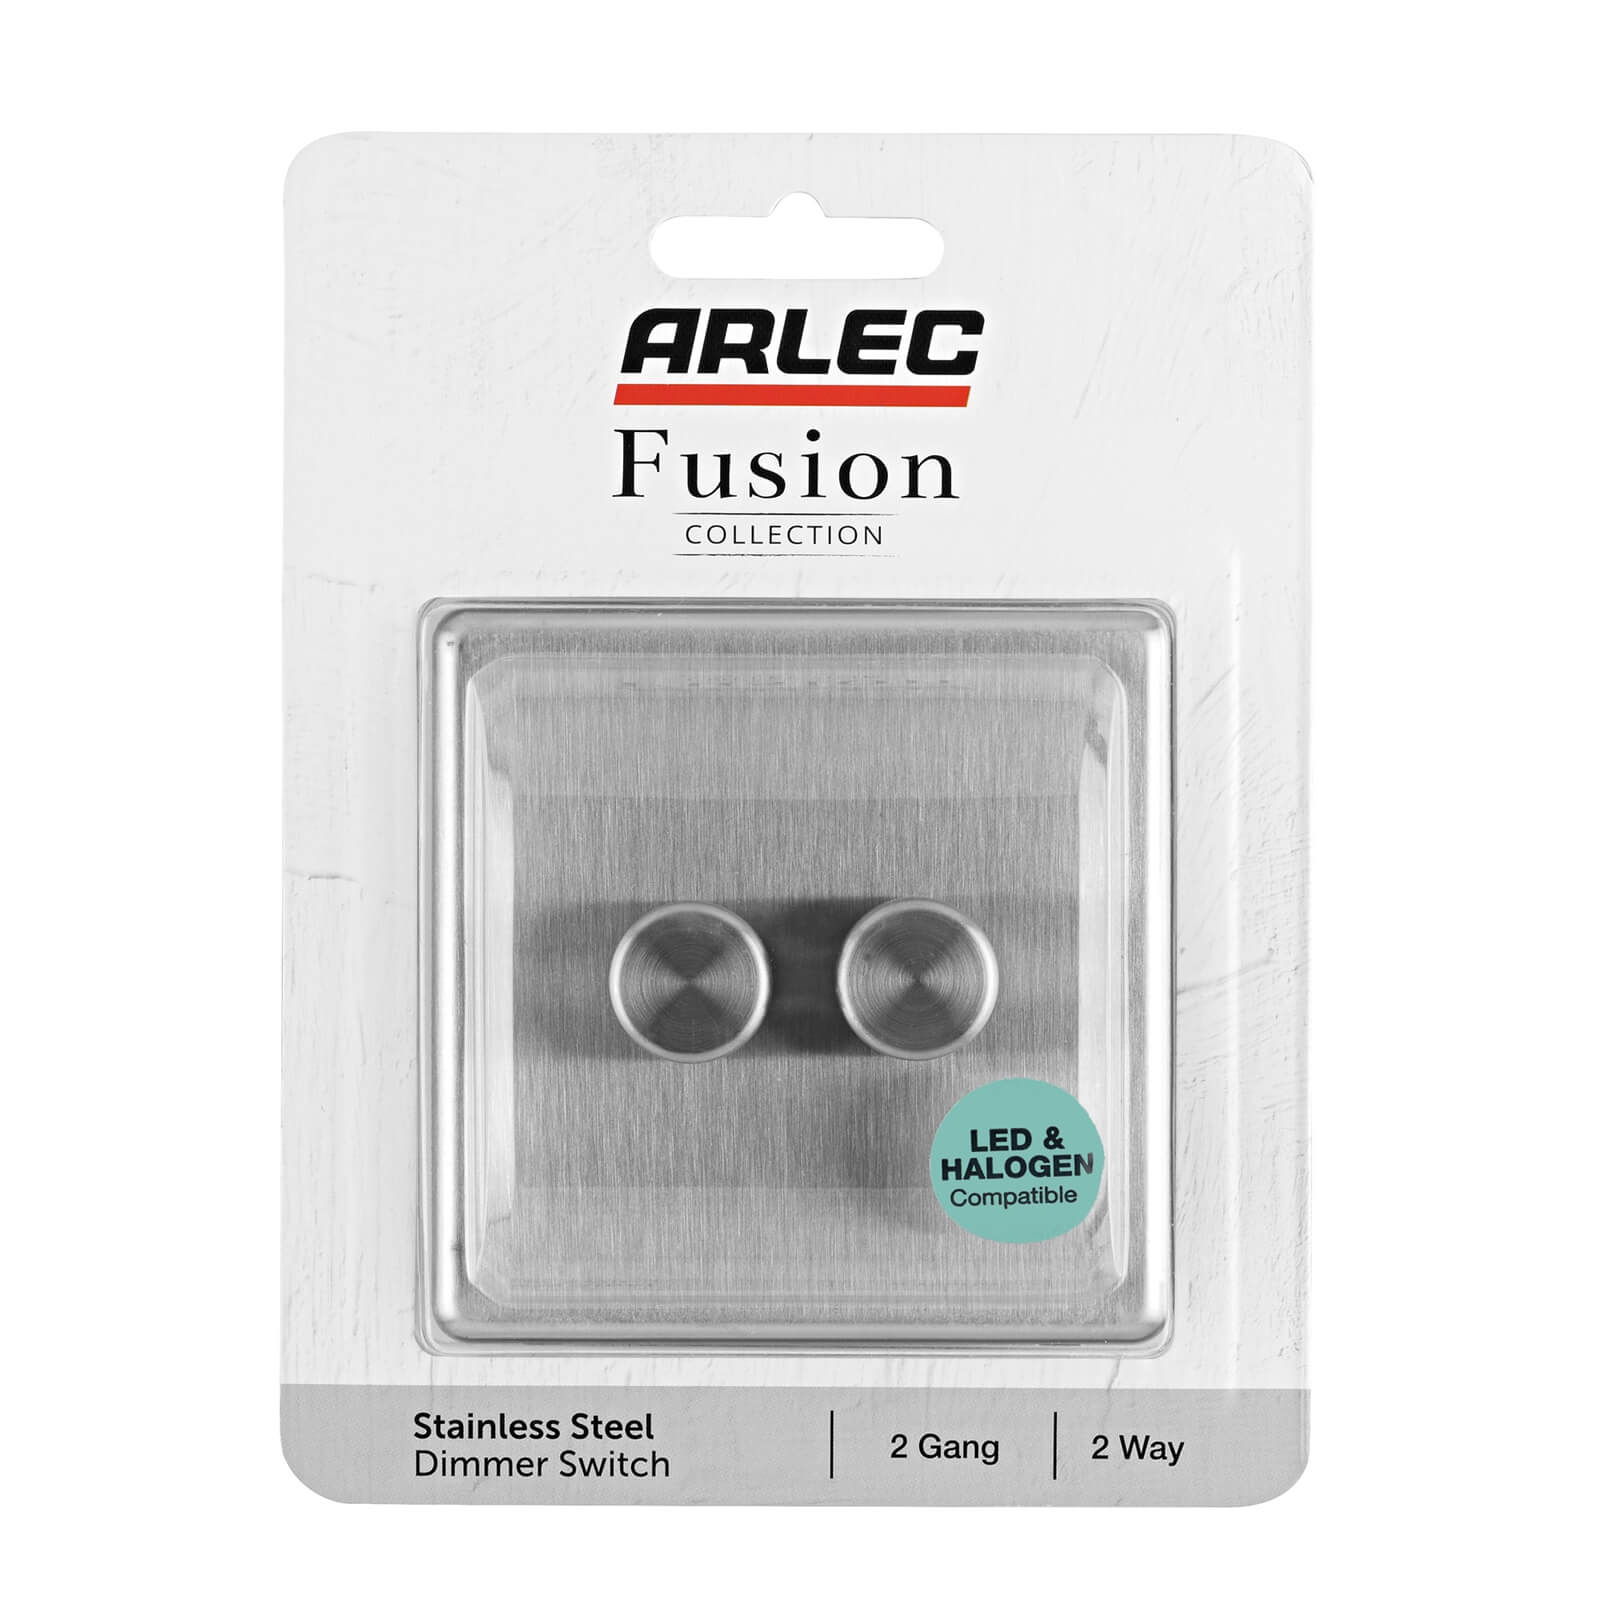 Arlec Fusion 2 Gang 2 Way Stainless Steel Dimmer switch